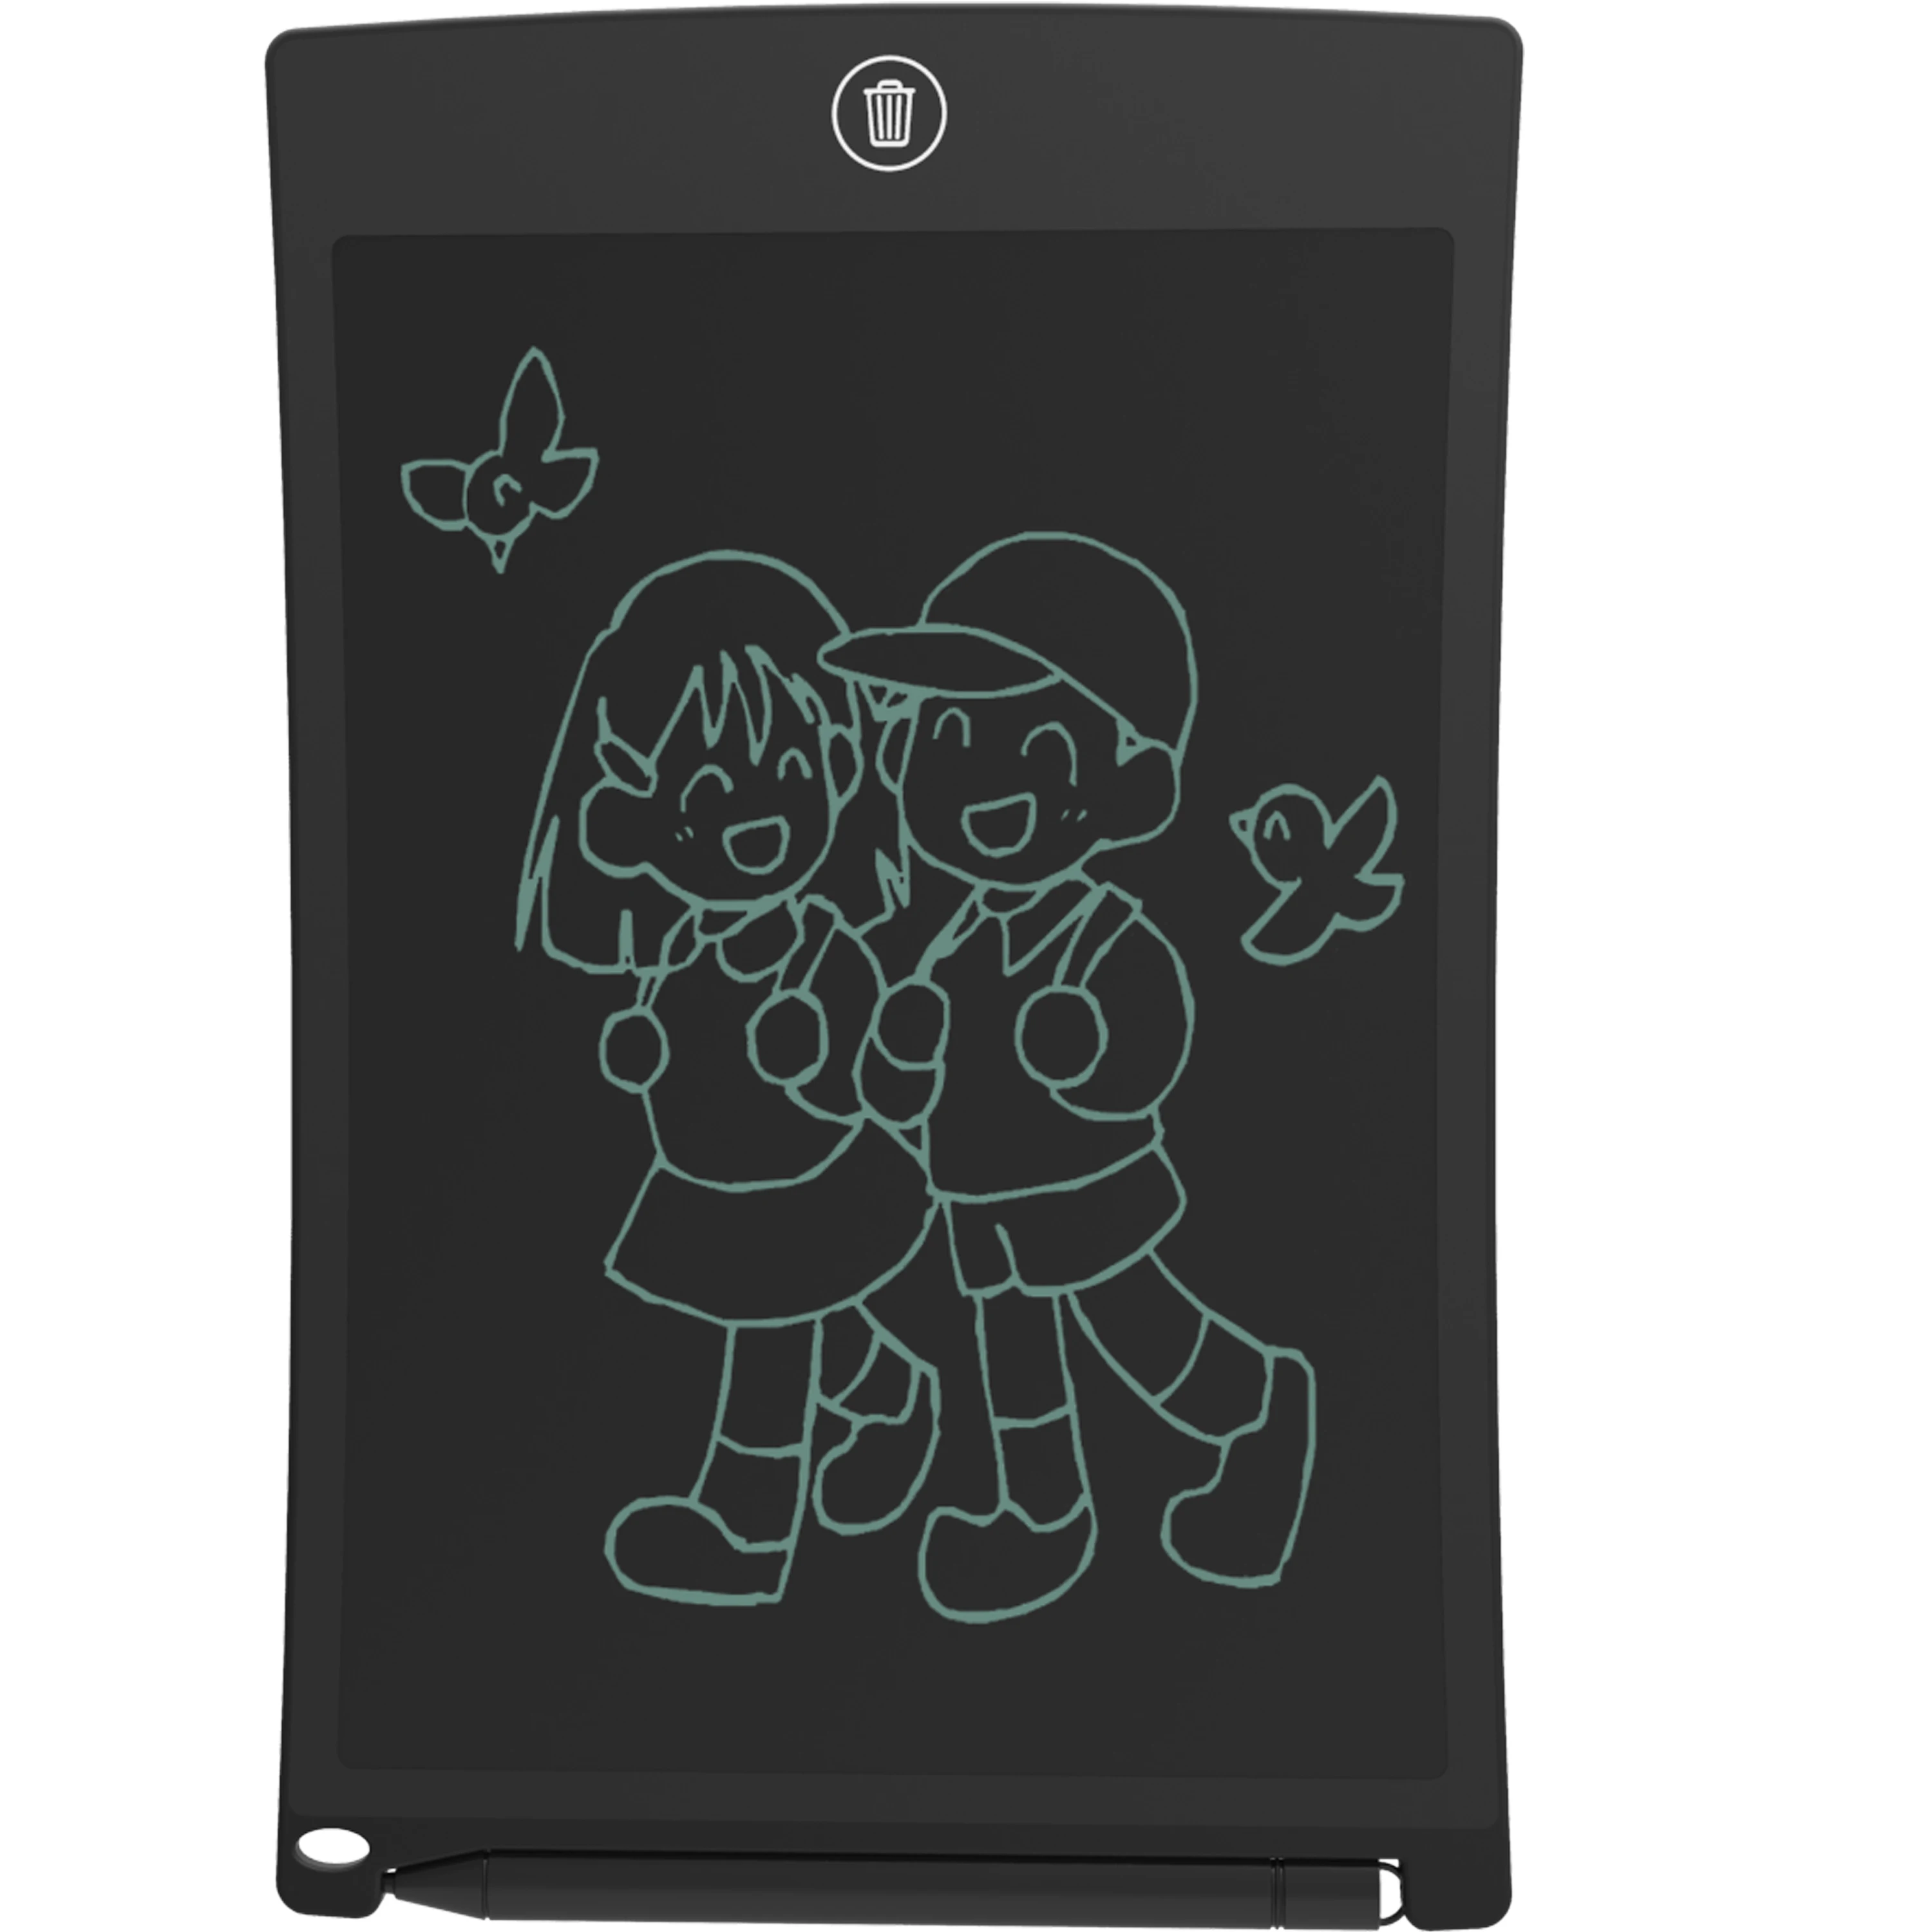 12 Inch LCD Writing Tablet Electronic Drawing Doodle Board Digital Colorful Handwriting Pad Gift for Kids Adult for Protect Eyes